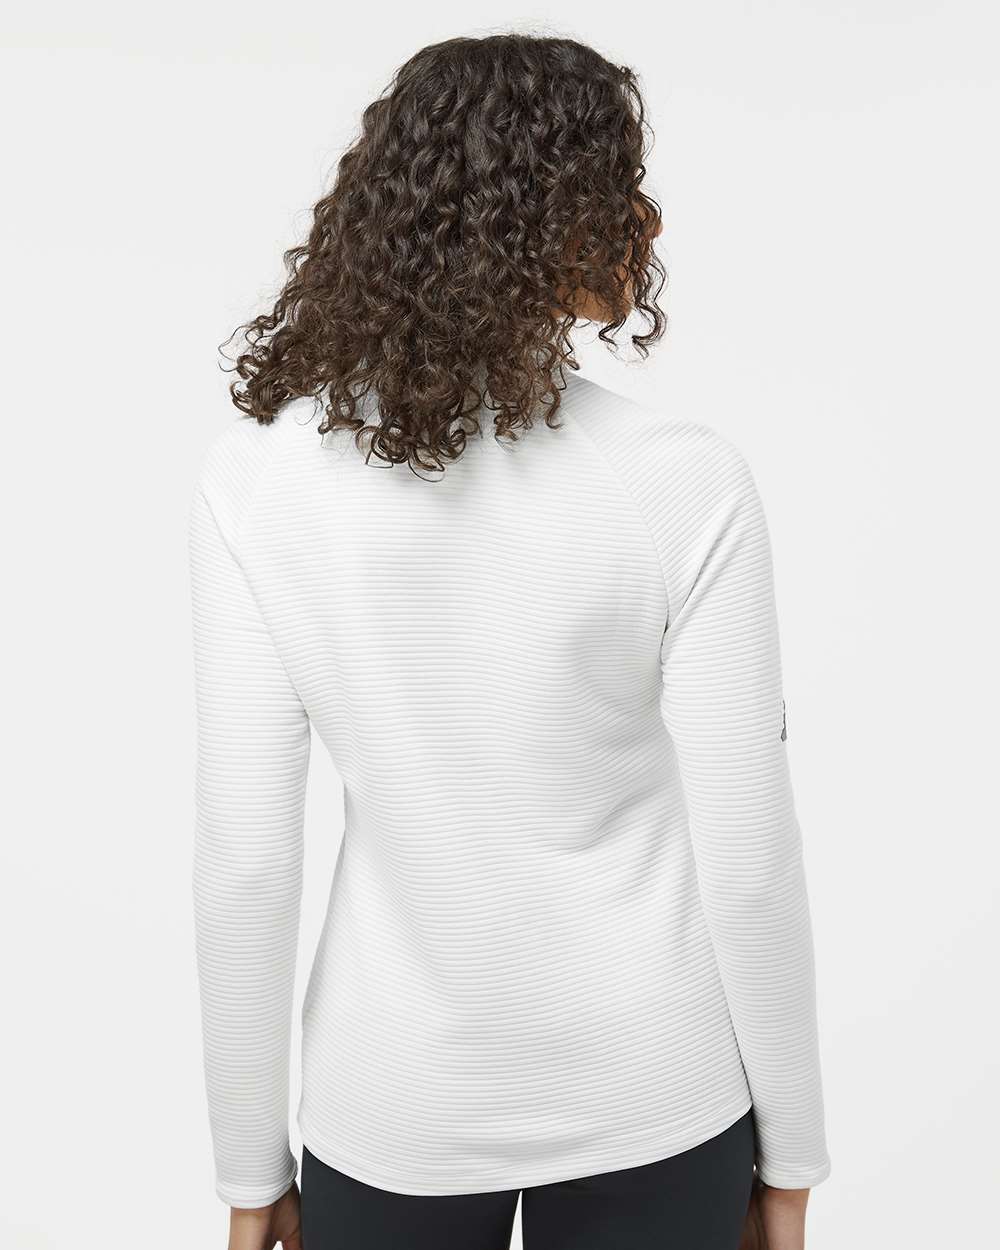 Adidas  A589 Women's Spacer Quarter-Zip Pullover #colormdl_Core White